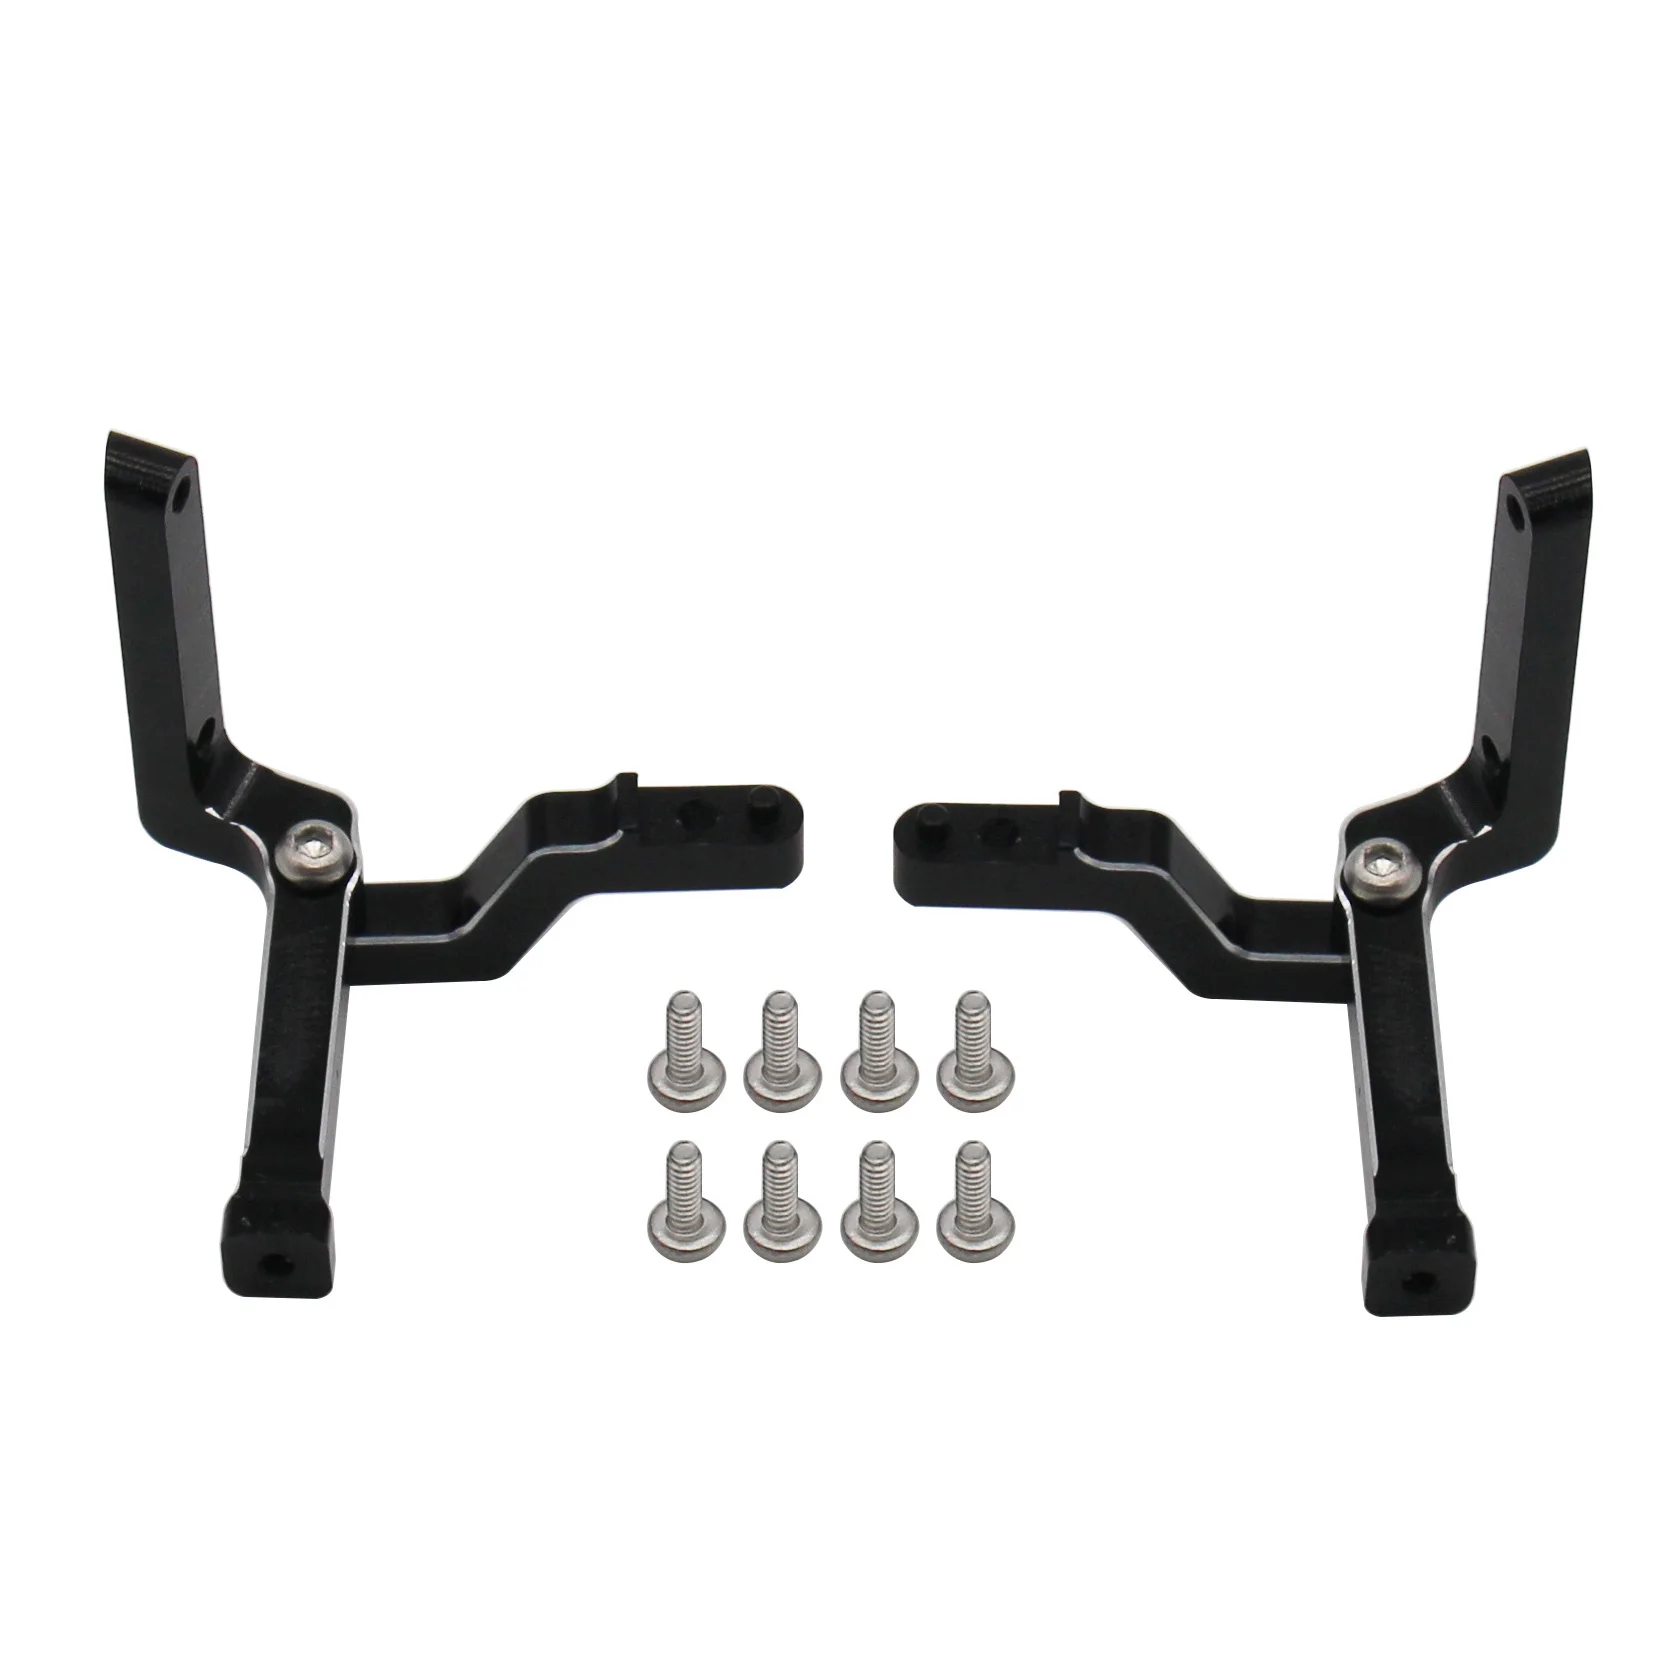 HR Aluminum Rear Body Post Mount for Axial SCX24 90081 C10